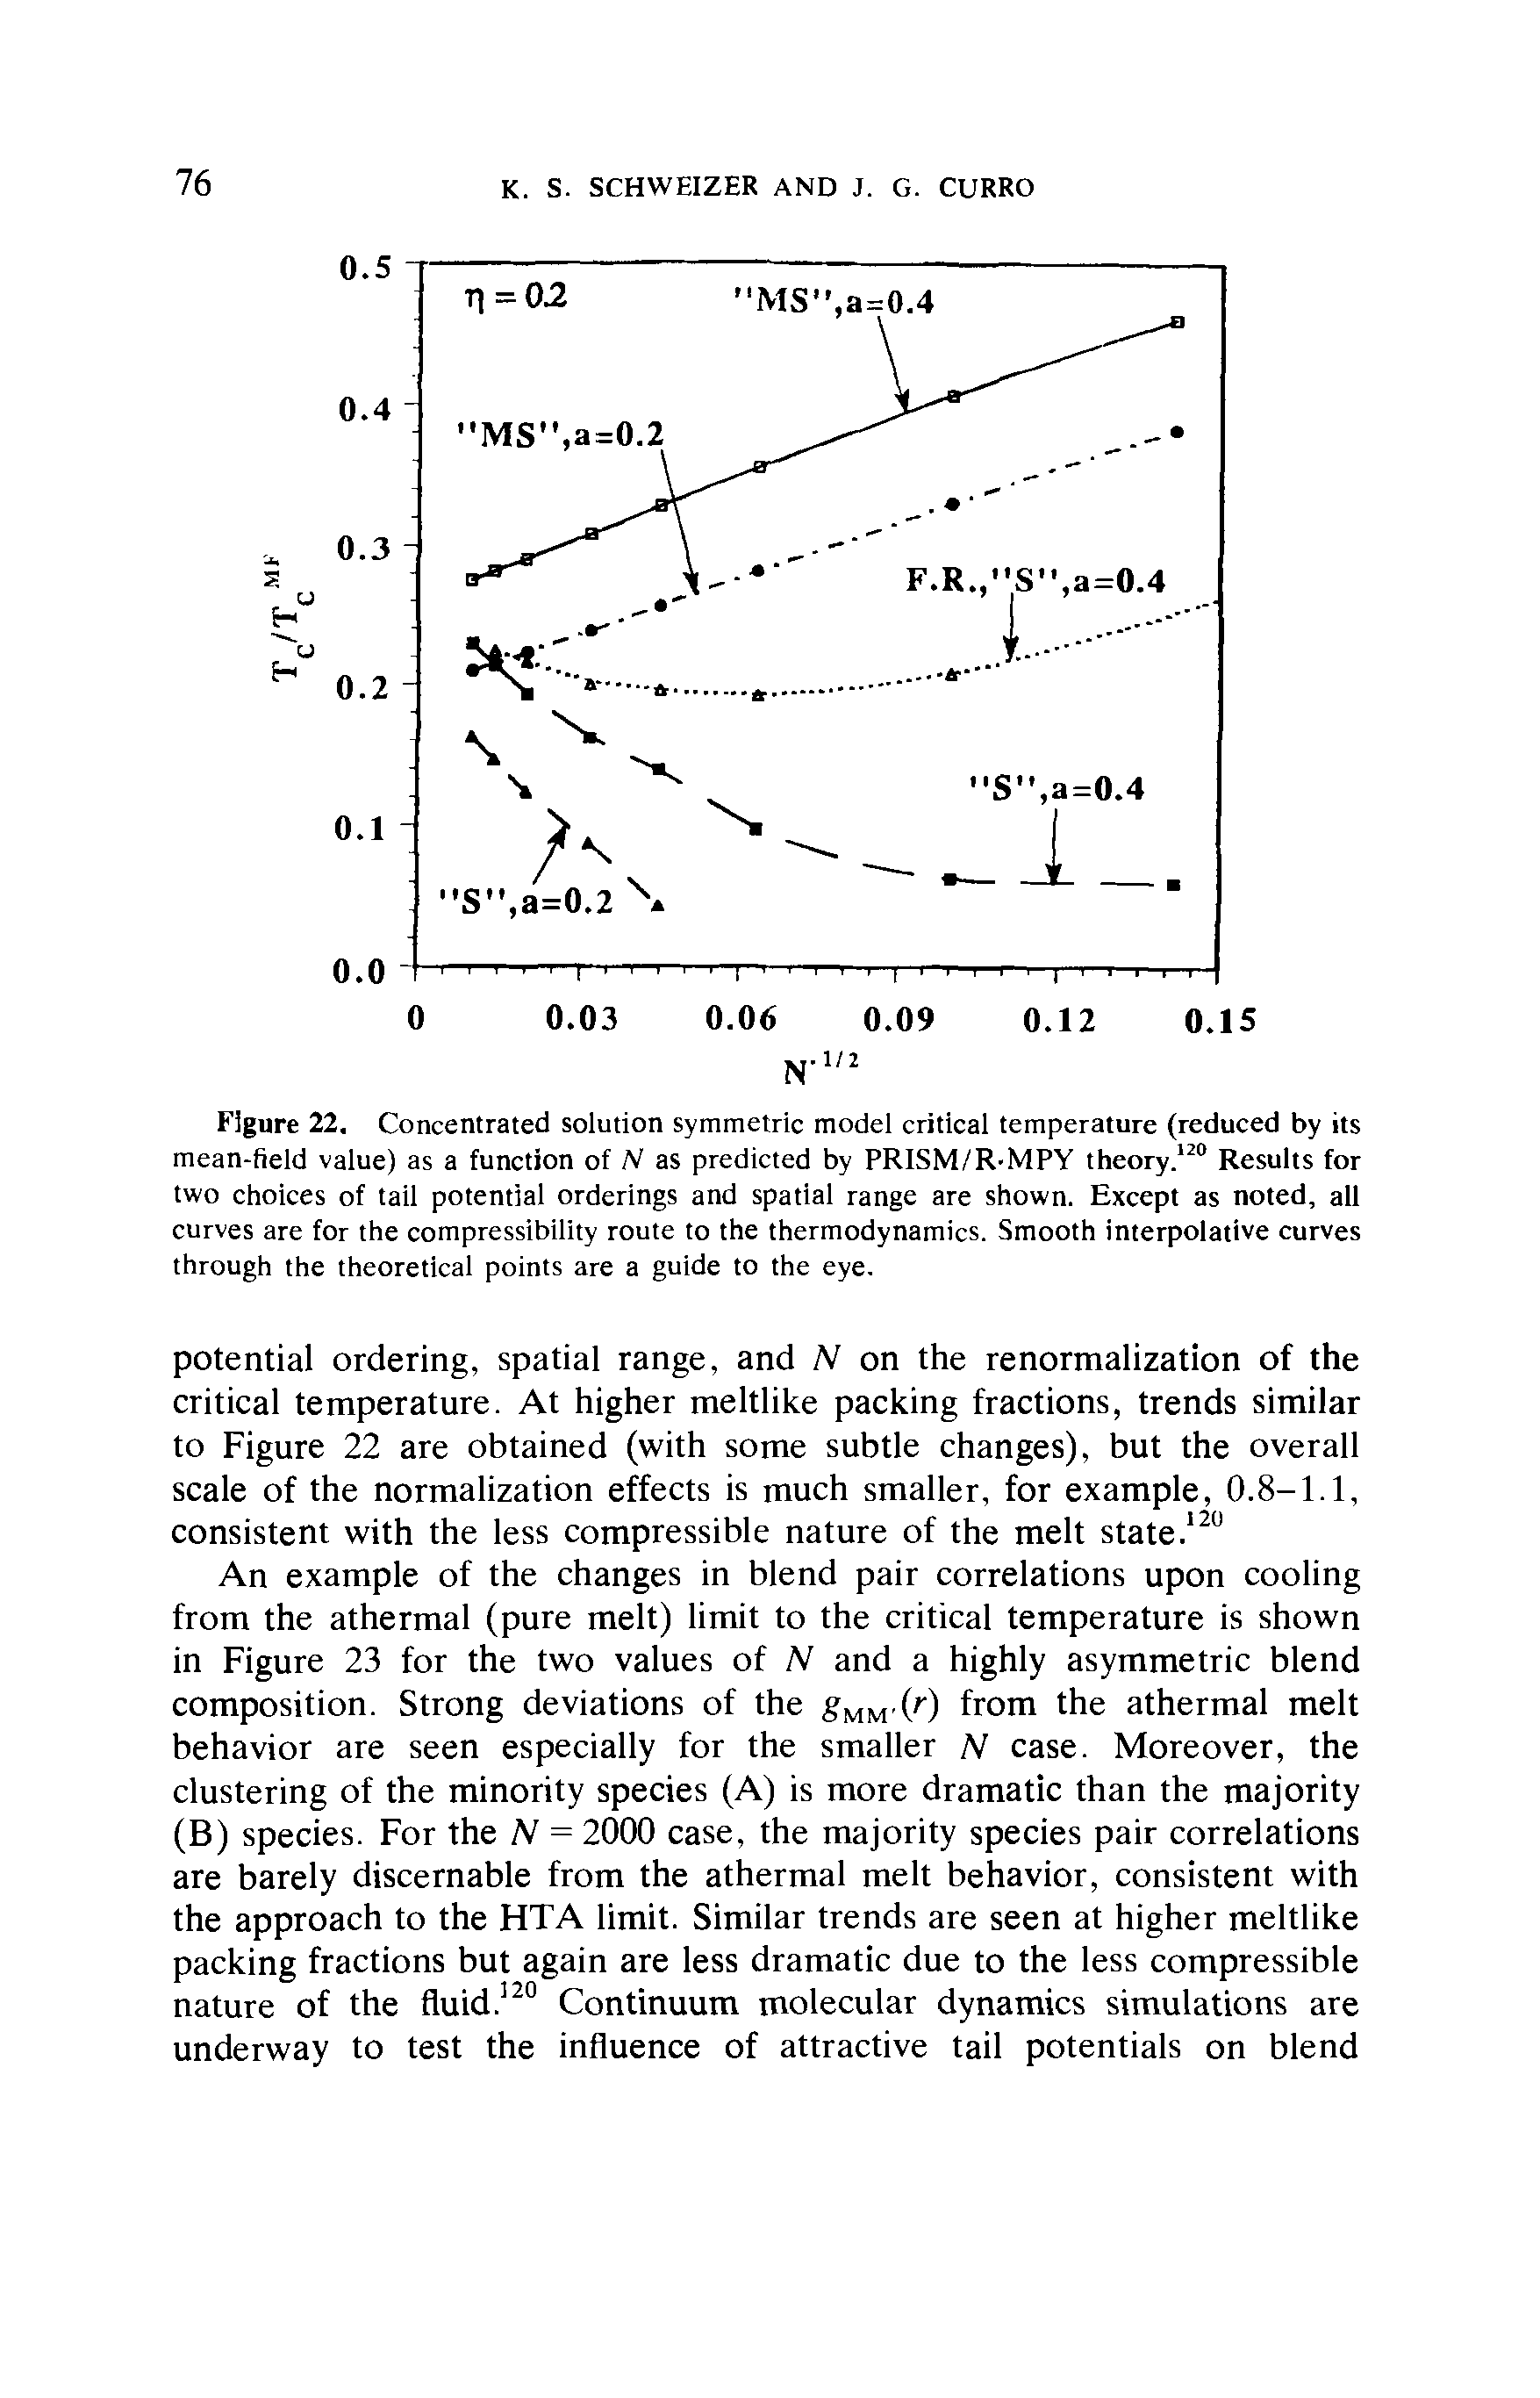 Figure 22. Concentrated solution symmetric model critical temperature (reduced by its mean-field value) as a function of N as predicted by PRISM/R-MPY theory. Results for two choices of tail potential orderings and spatial range are shown. Except as noted, all curves are for the compressibility route to the thermodynamics. Smooth interpolatWe curves through the theoretical points are a guide to the eye.